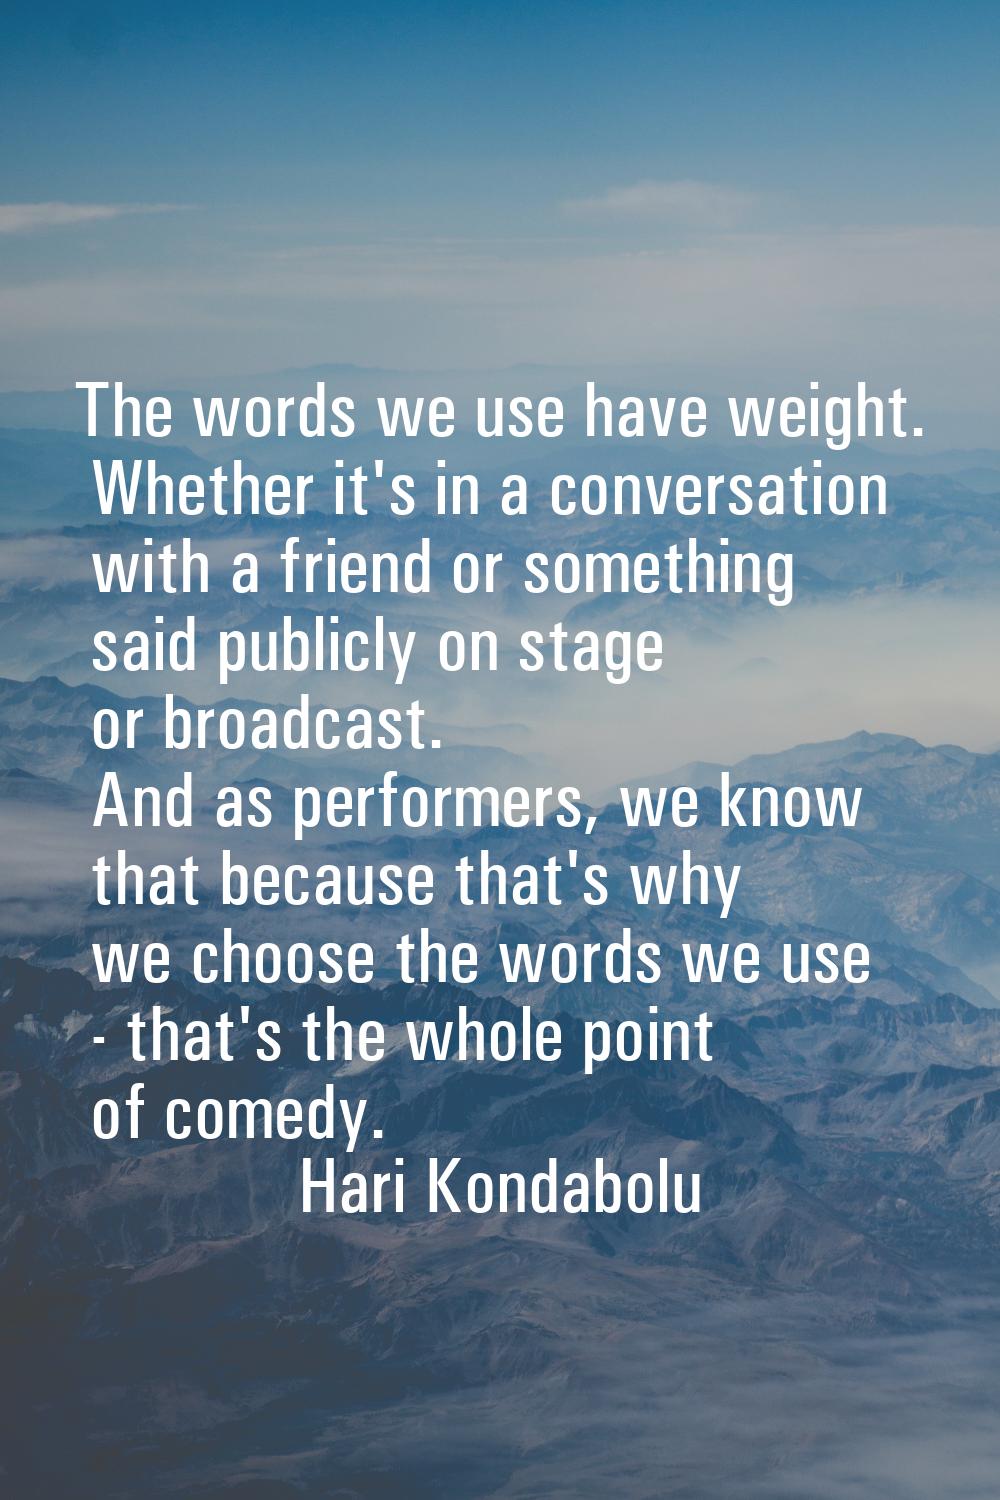 The words we use have weight. Whether it's in a conversation with a friend or something said public